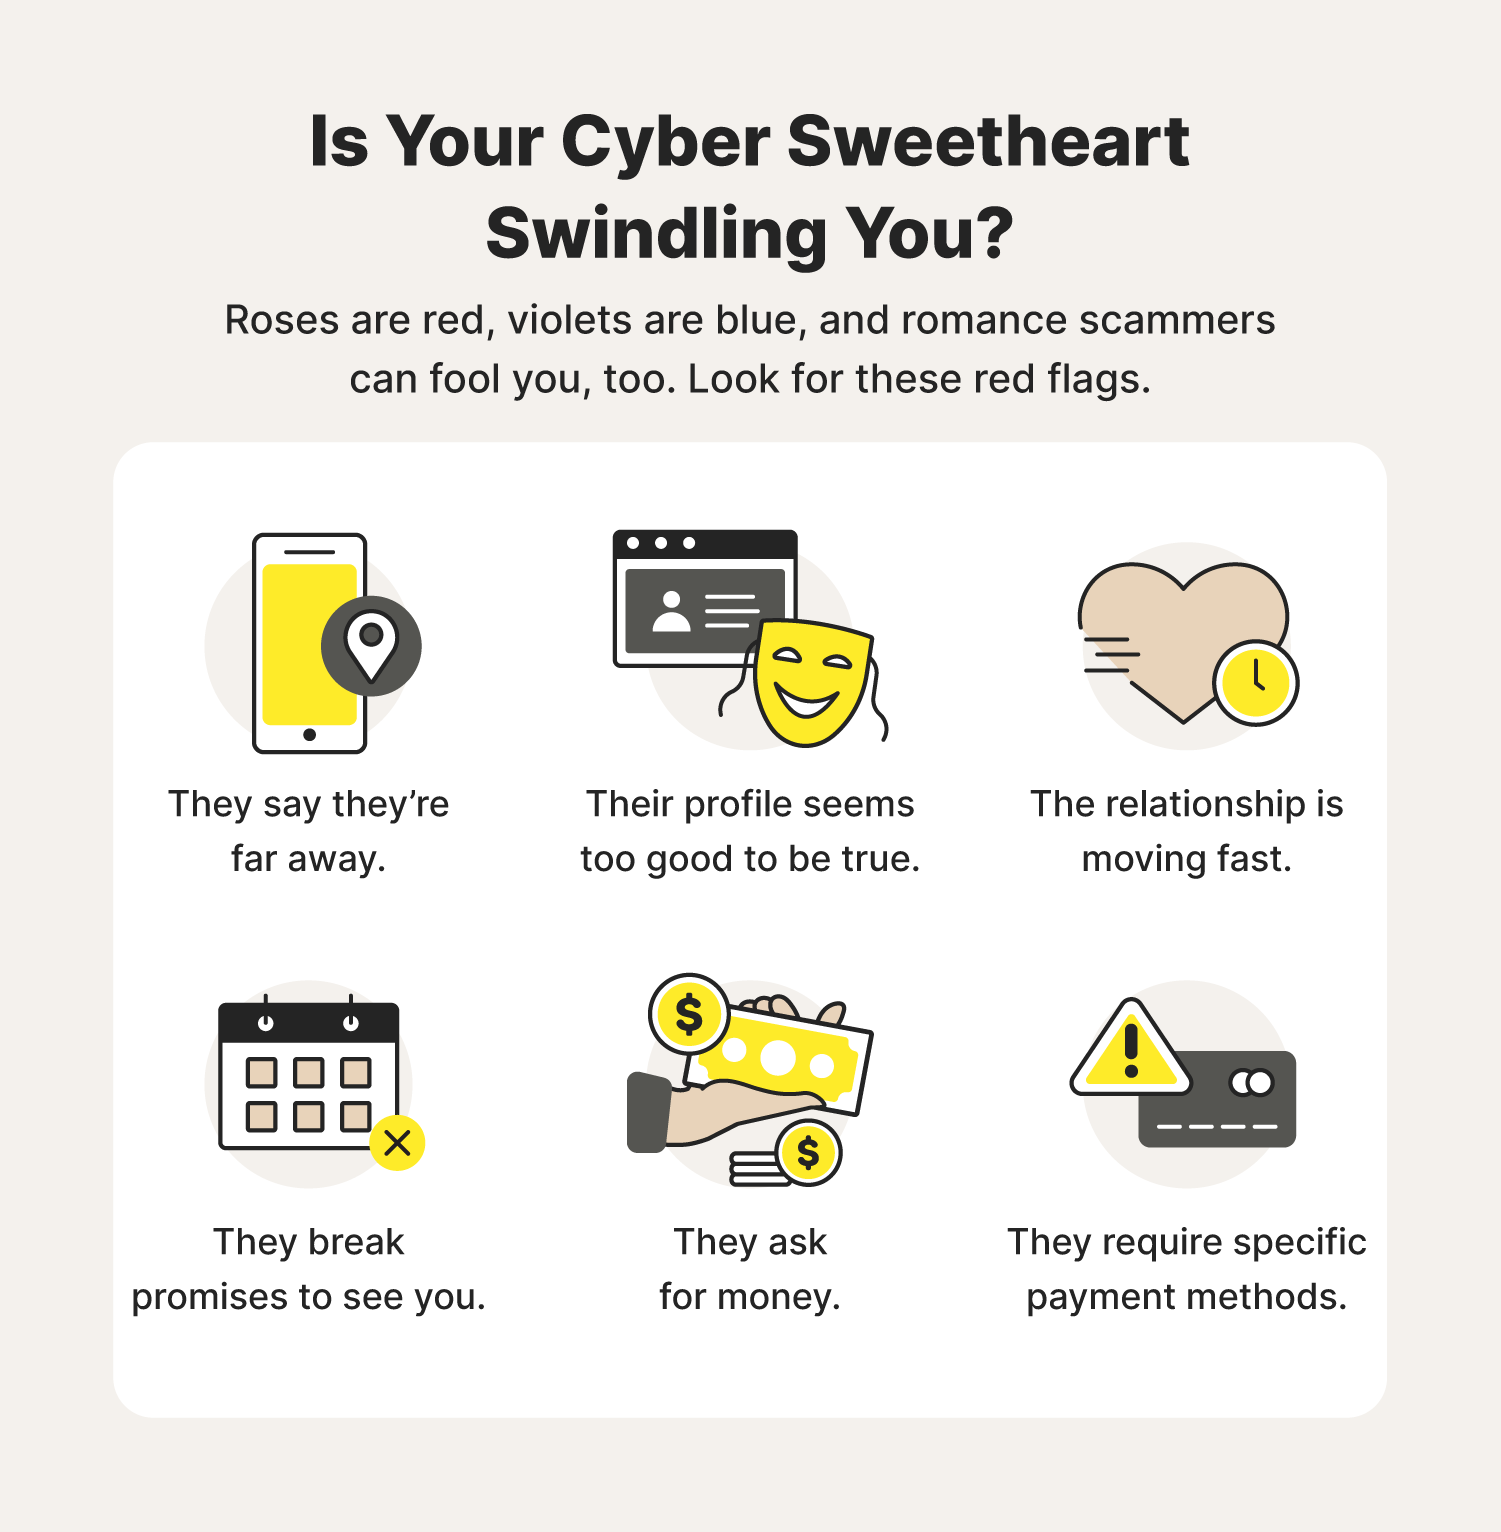 Six red flags to look for during online dating to ensure you’re not being subject to a romance scam.